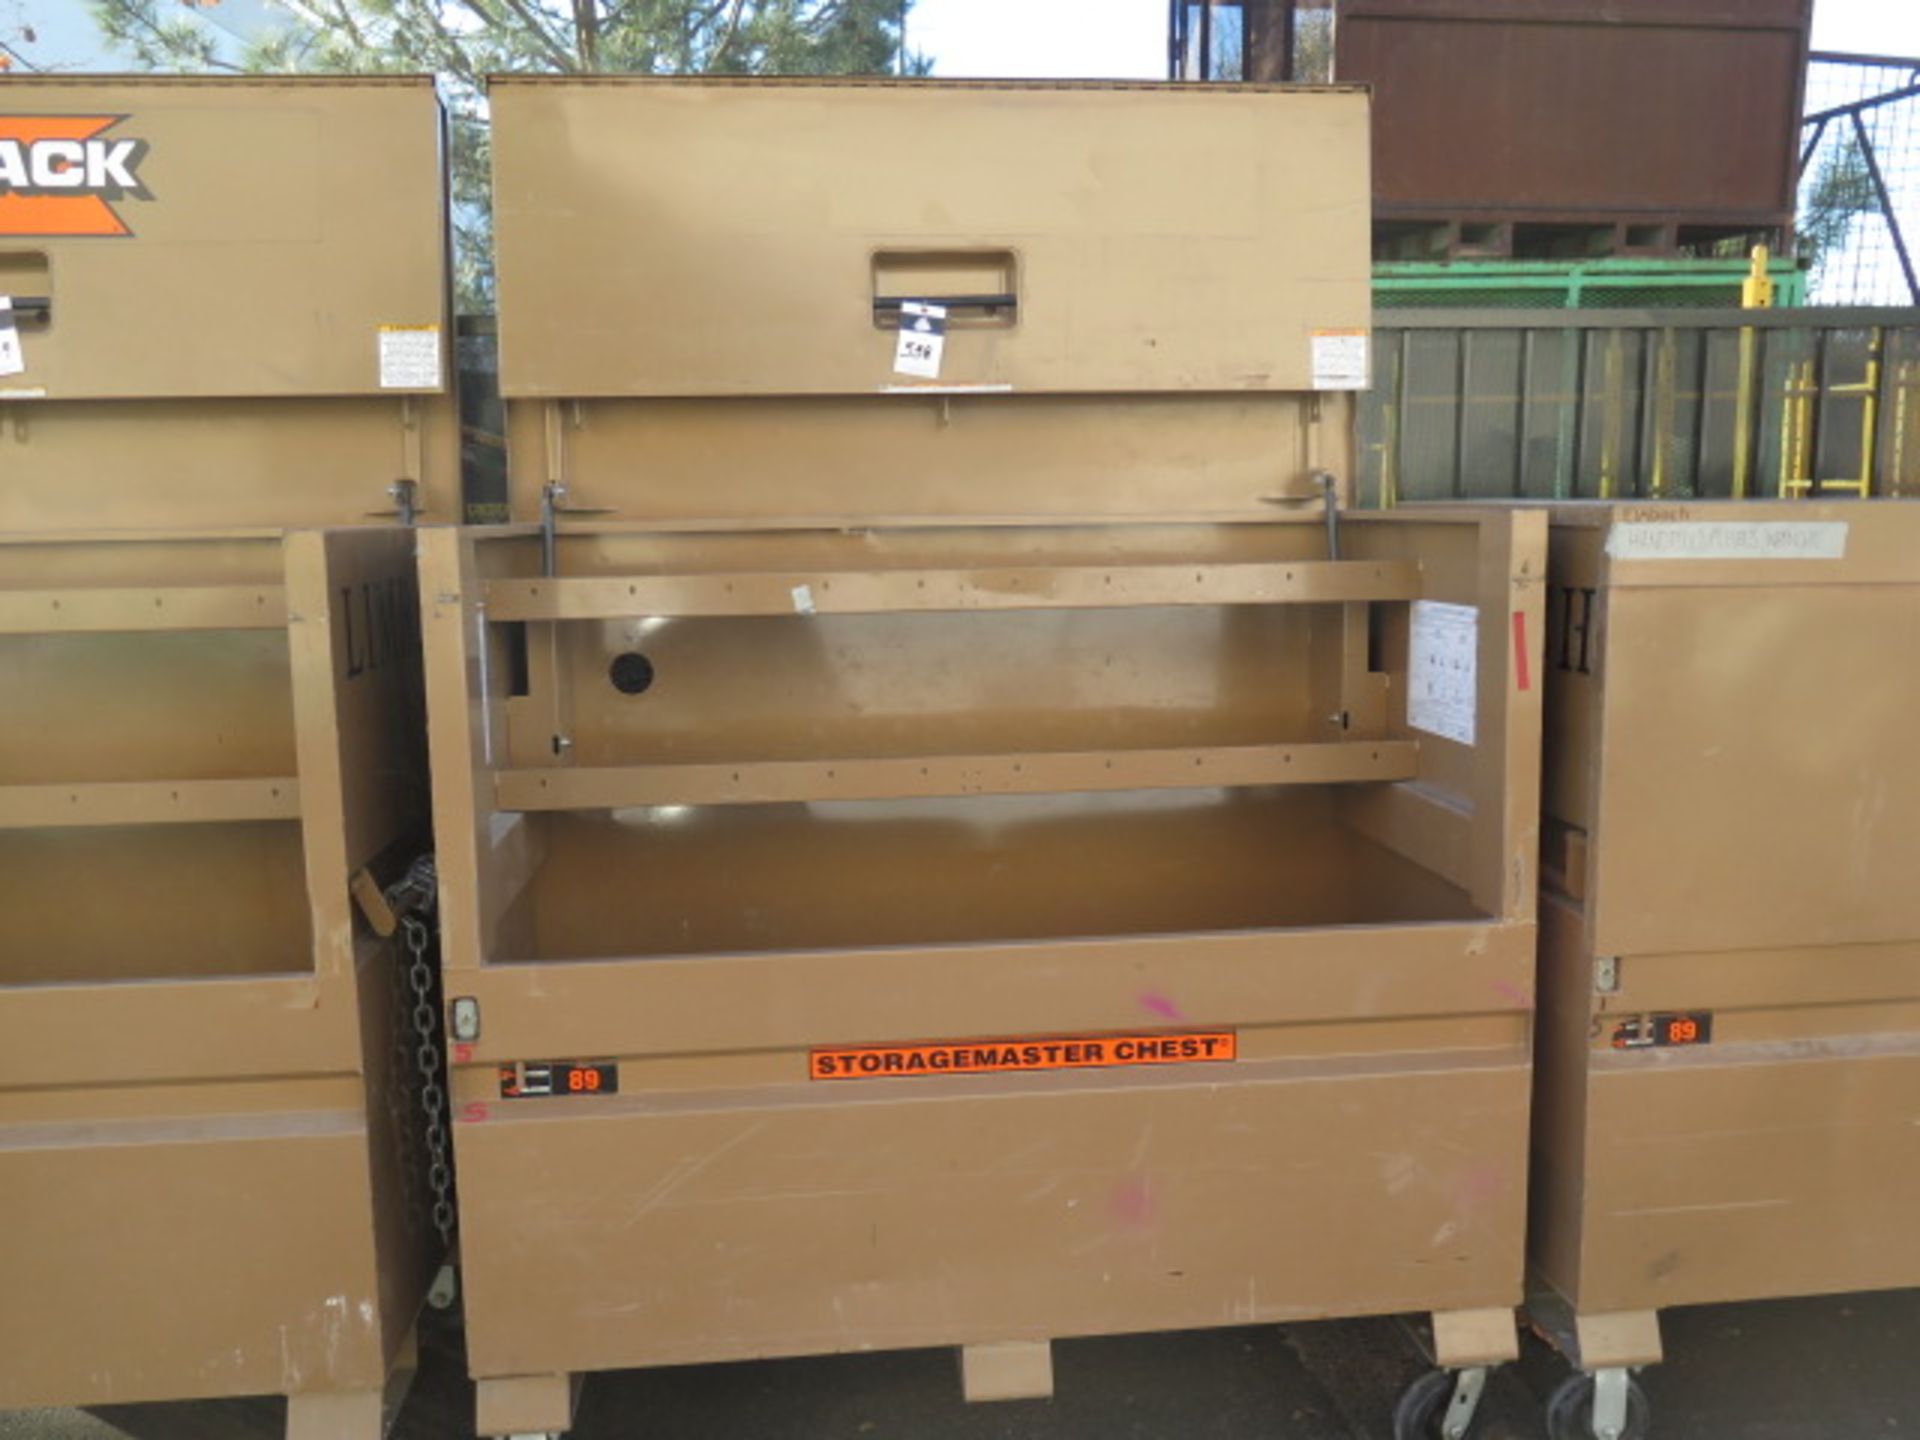 Knaack mdl. 89 "Storage Master" Rolling Job Box (SOLD AS-IS - NO WARRANTY) - Image 3 of 5